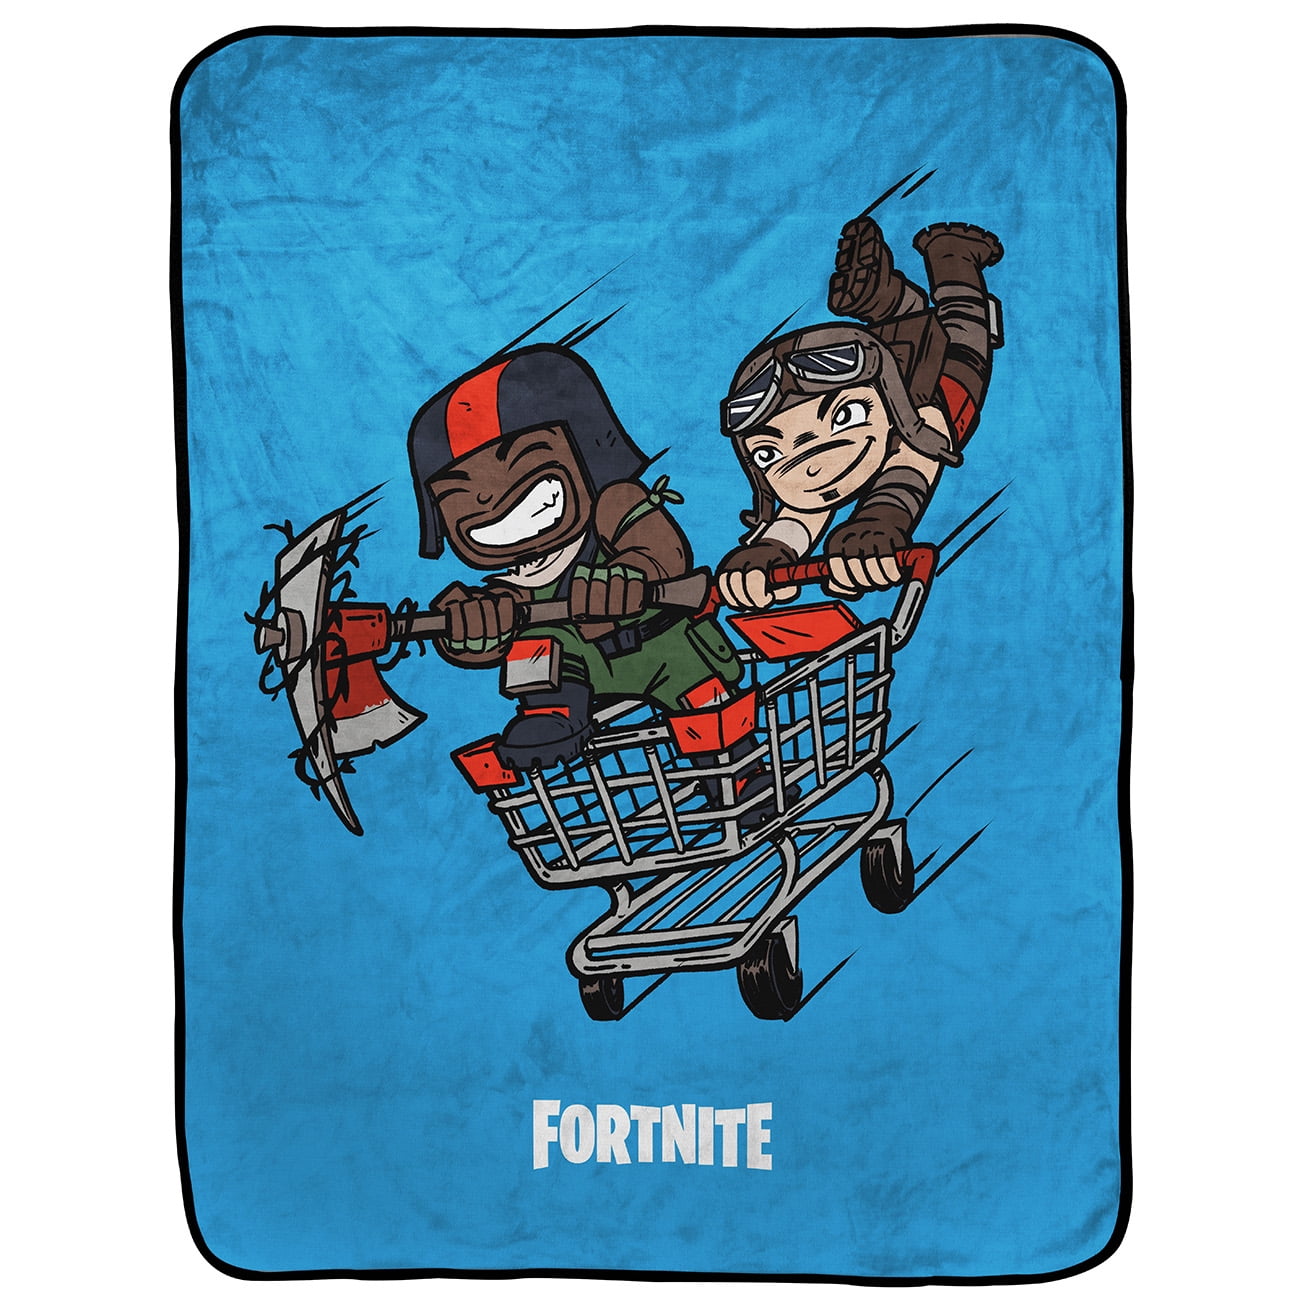 Fortnite Go Go Silk Touch Throw, 40 x 50, Microfiber, Blue, Epic Games, Gaming Bedding